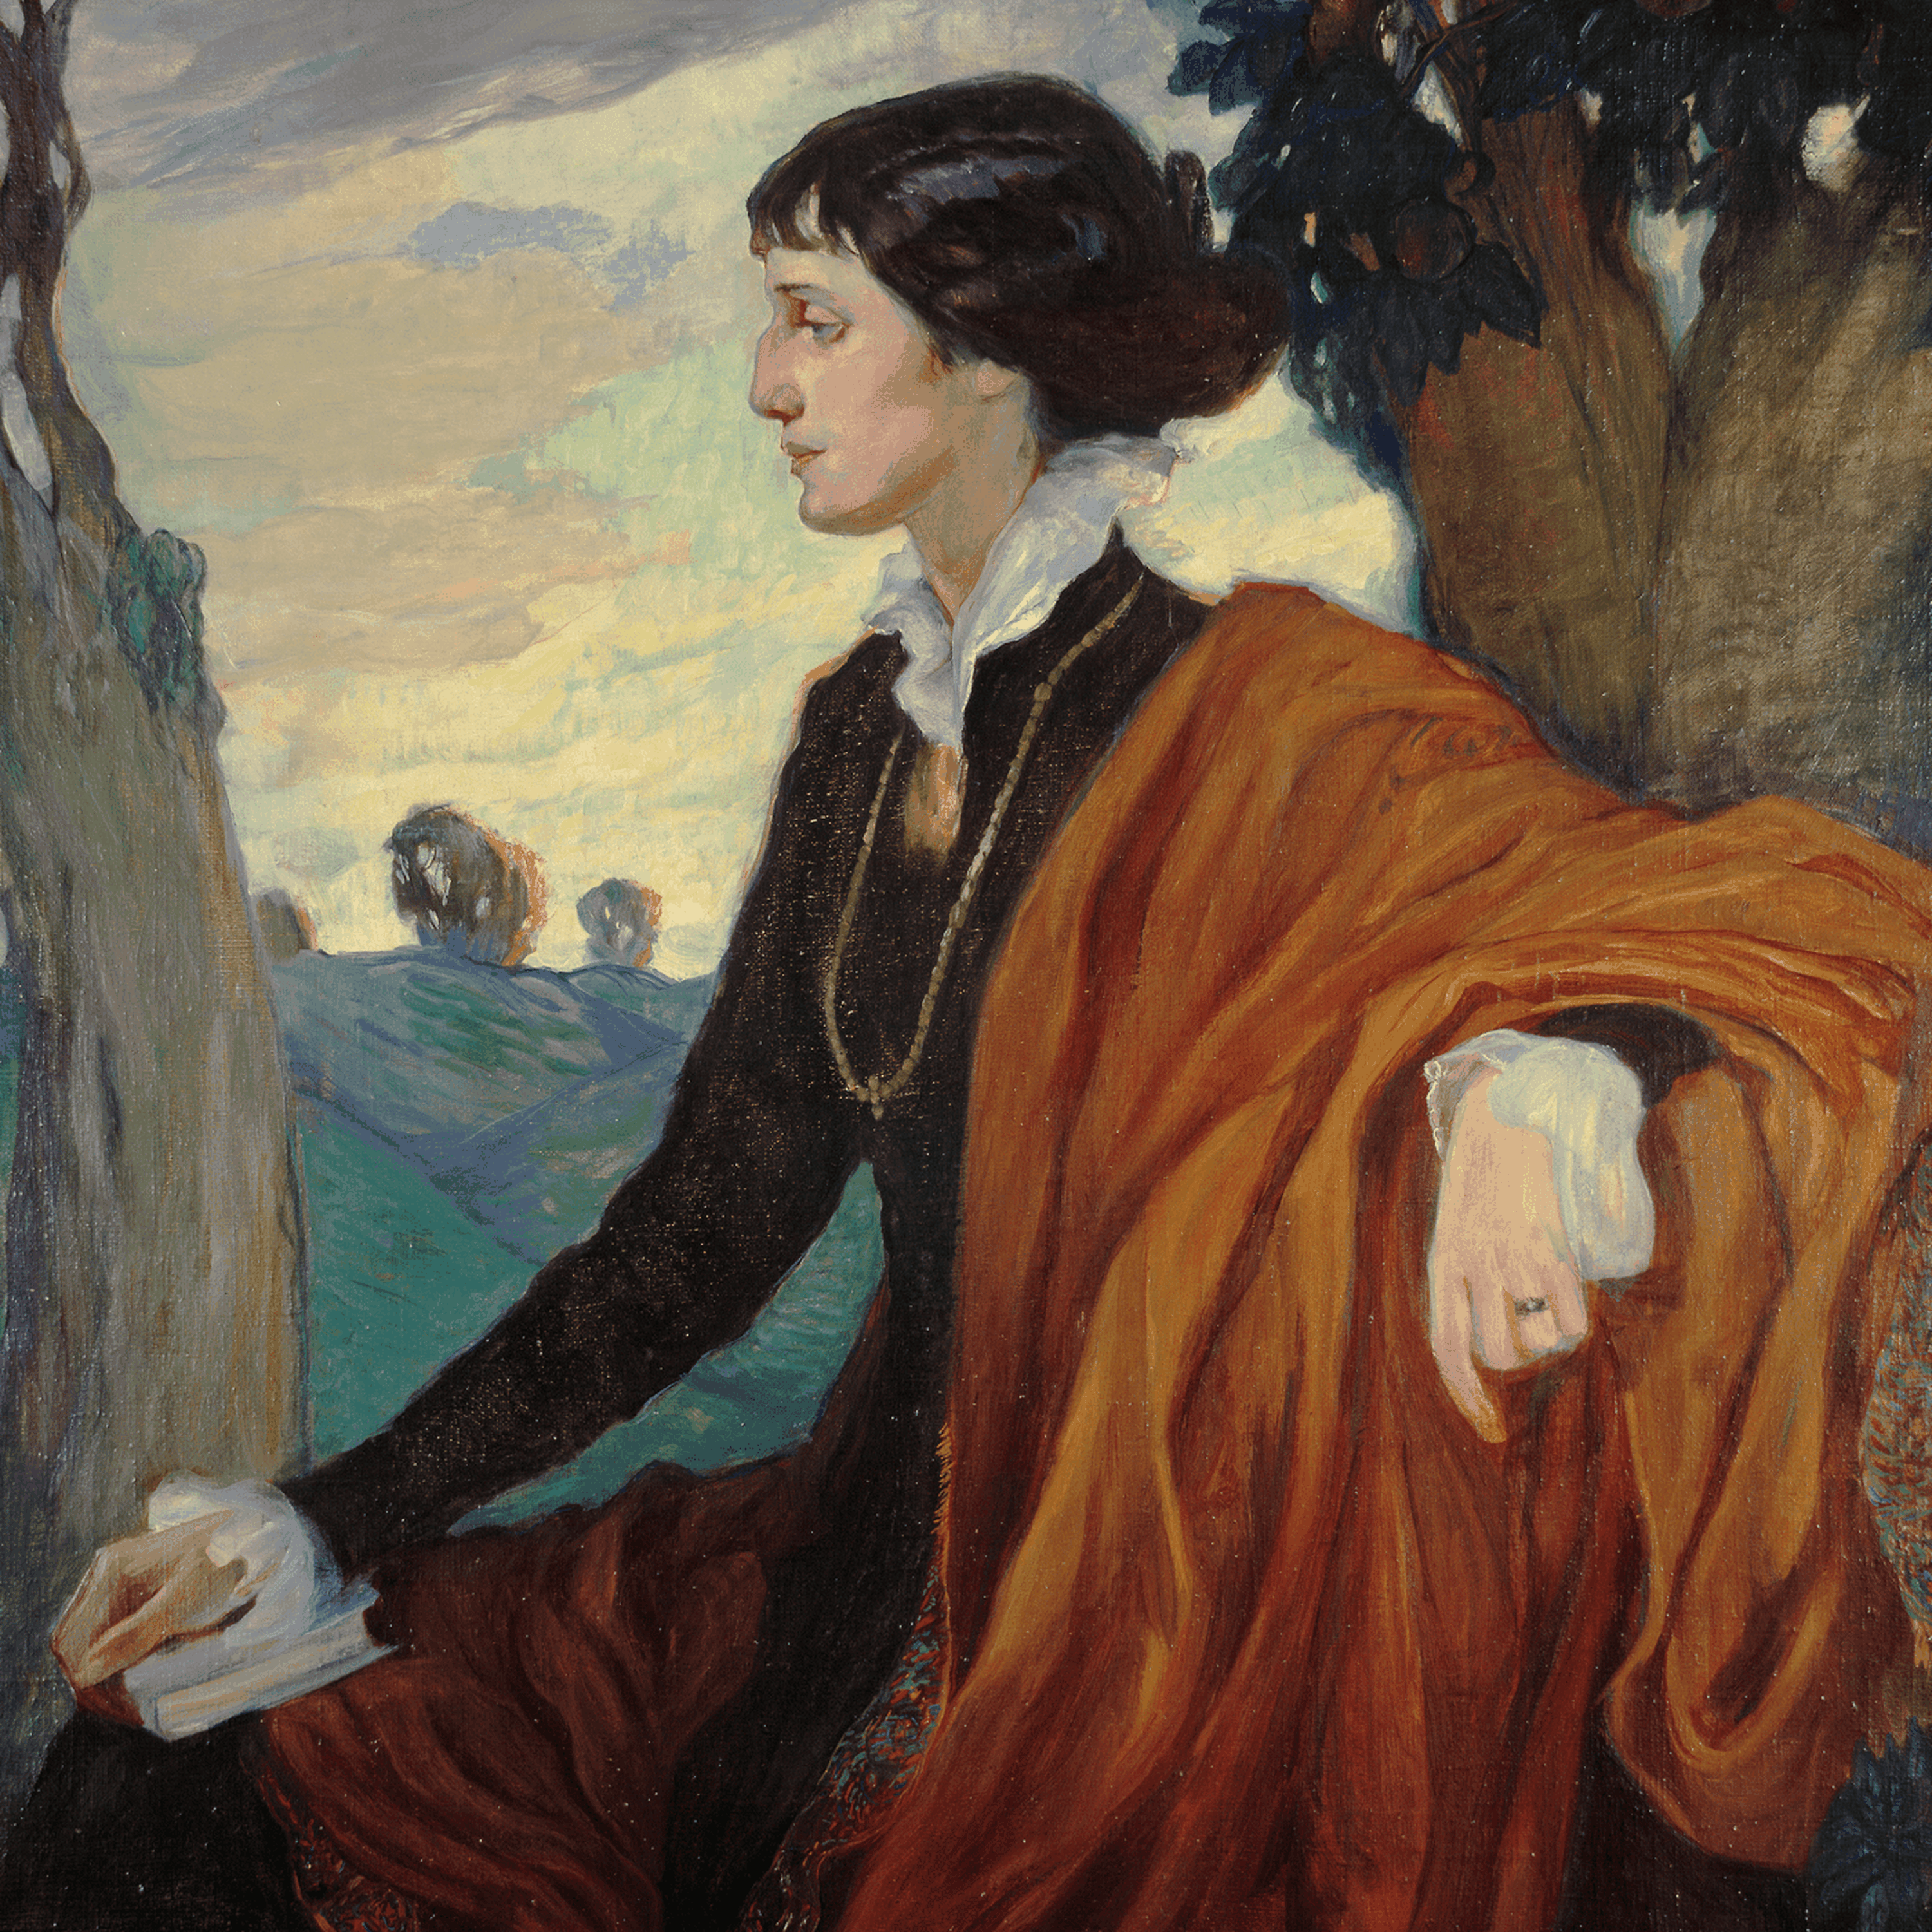 cover art for “Lot’s Wife” by Anna Akhmatova